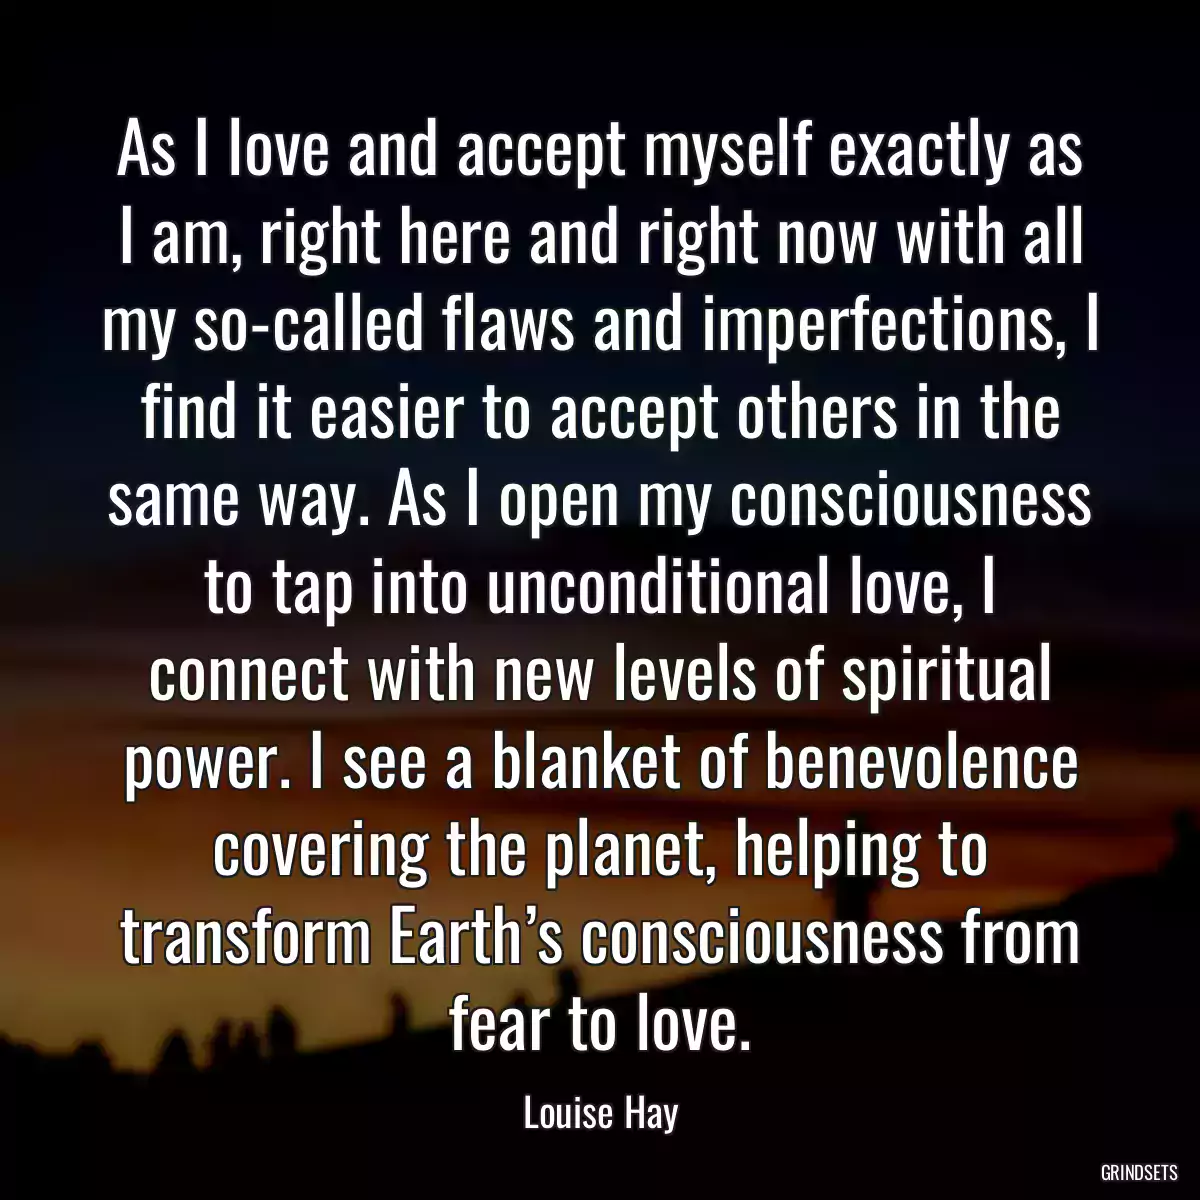 As I love and accept myself exactly as I am, right here and right now with all my so-called flaws and imperfections, I find it easier to accept others in the same way. As I open my consciousness to tap into unconditional love, I connect with new levels of spiritual power. I see a blanket of benevolence covering the planet, helping to transform Earth’s consciousness from fear to love.